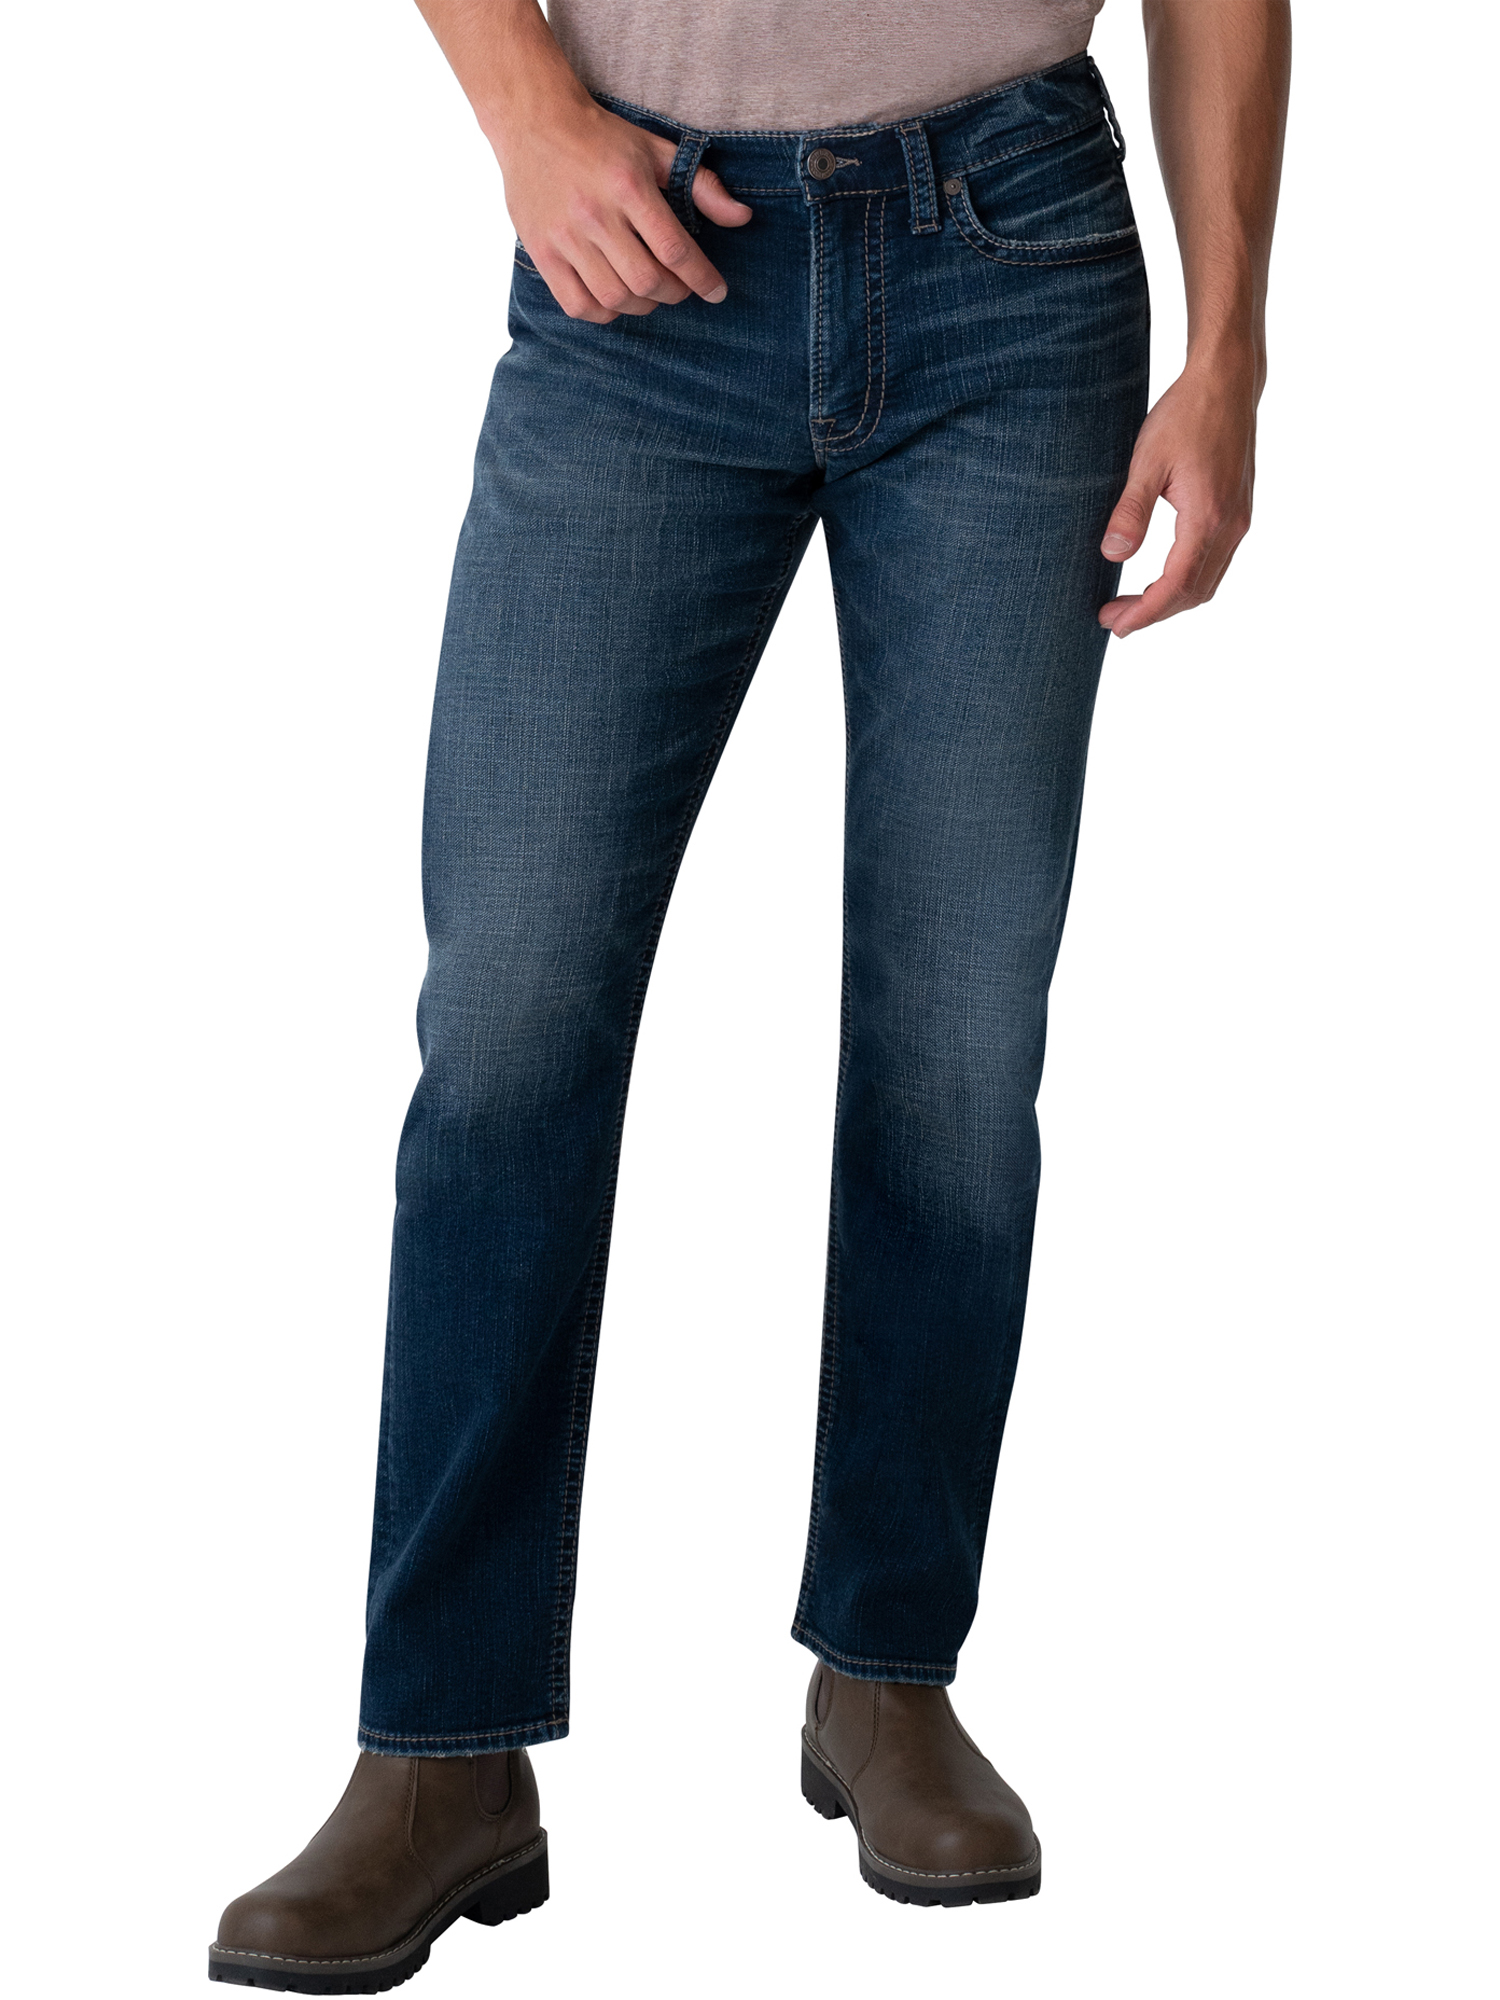 Silver Jeans Co. Men's Eddie Relaxed Fit Tapered Leg Jeans, Waist Sizes 28-42 - image 1 of 3